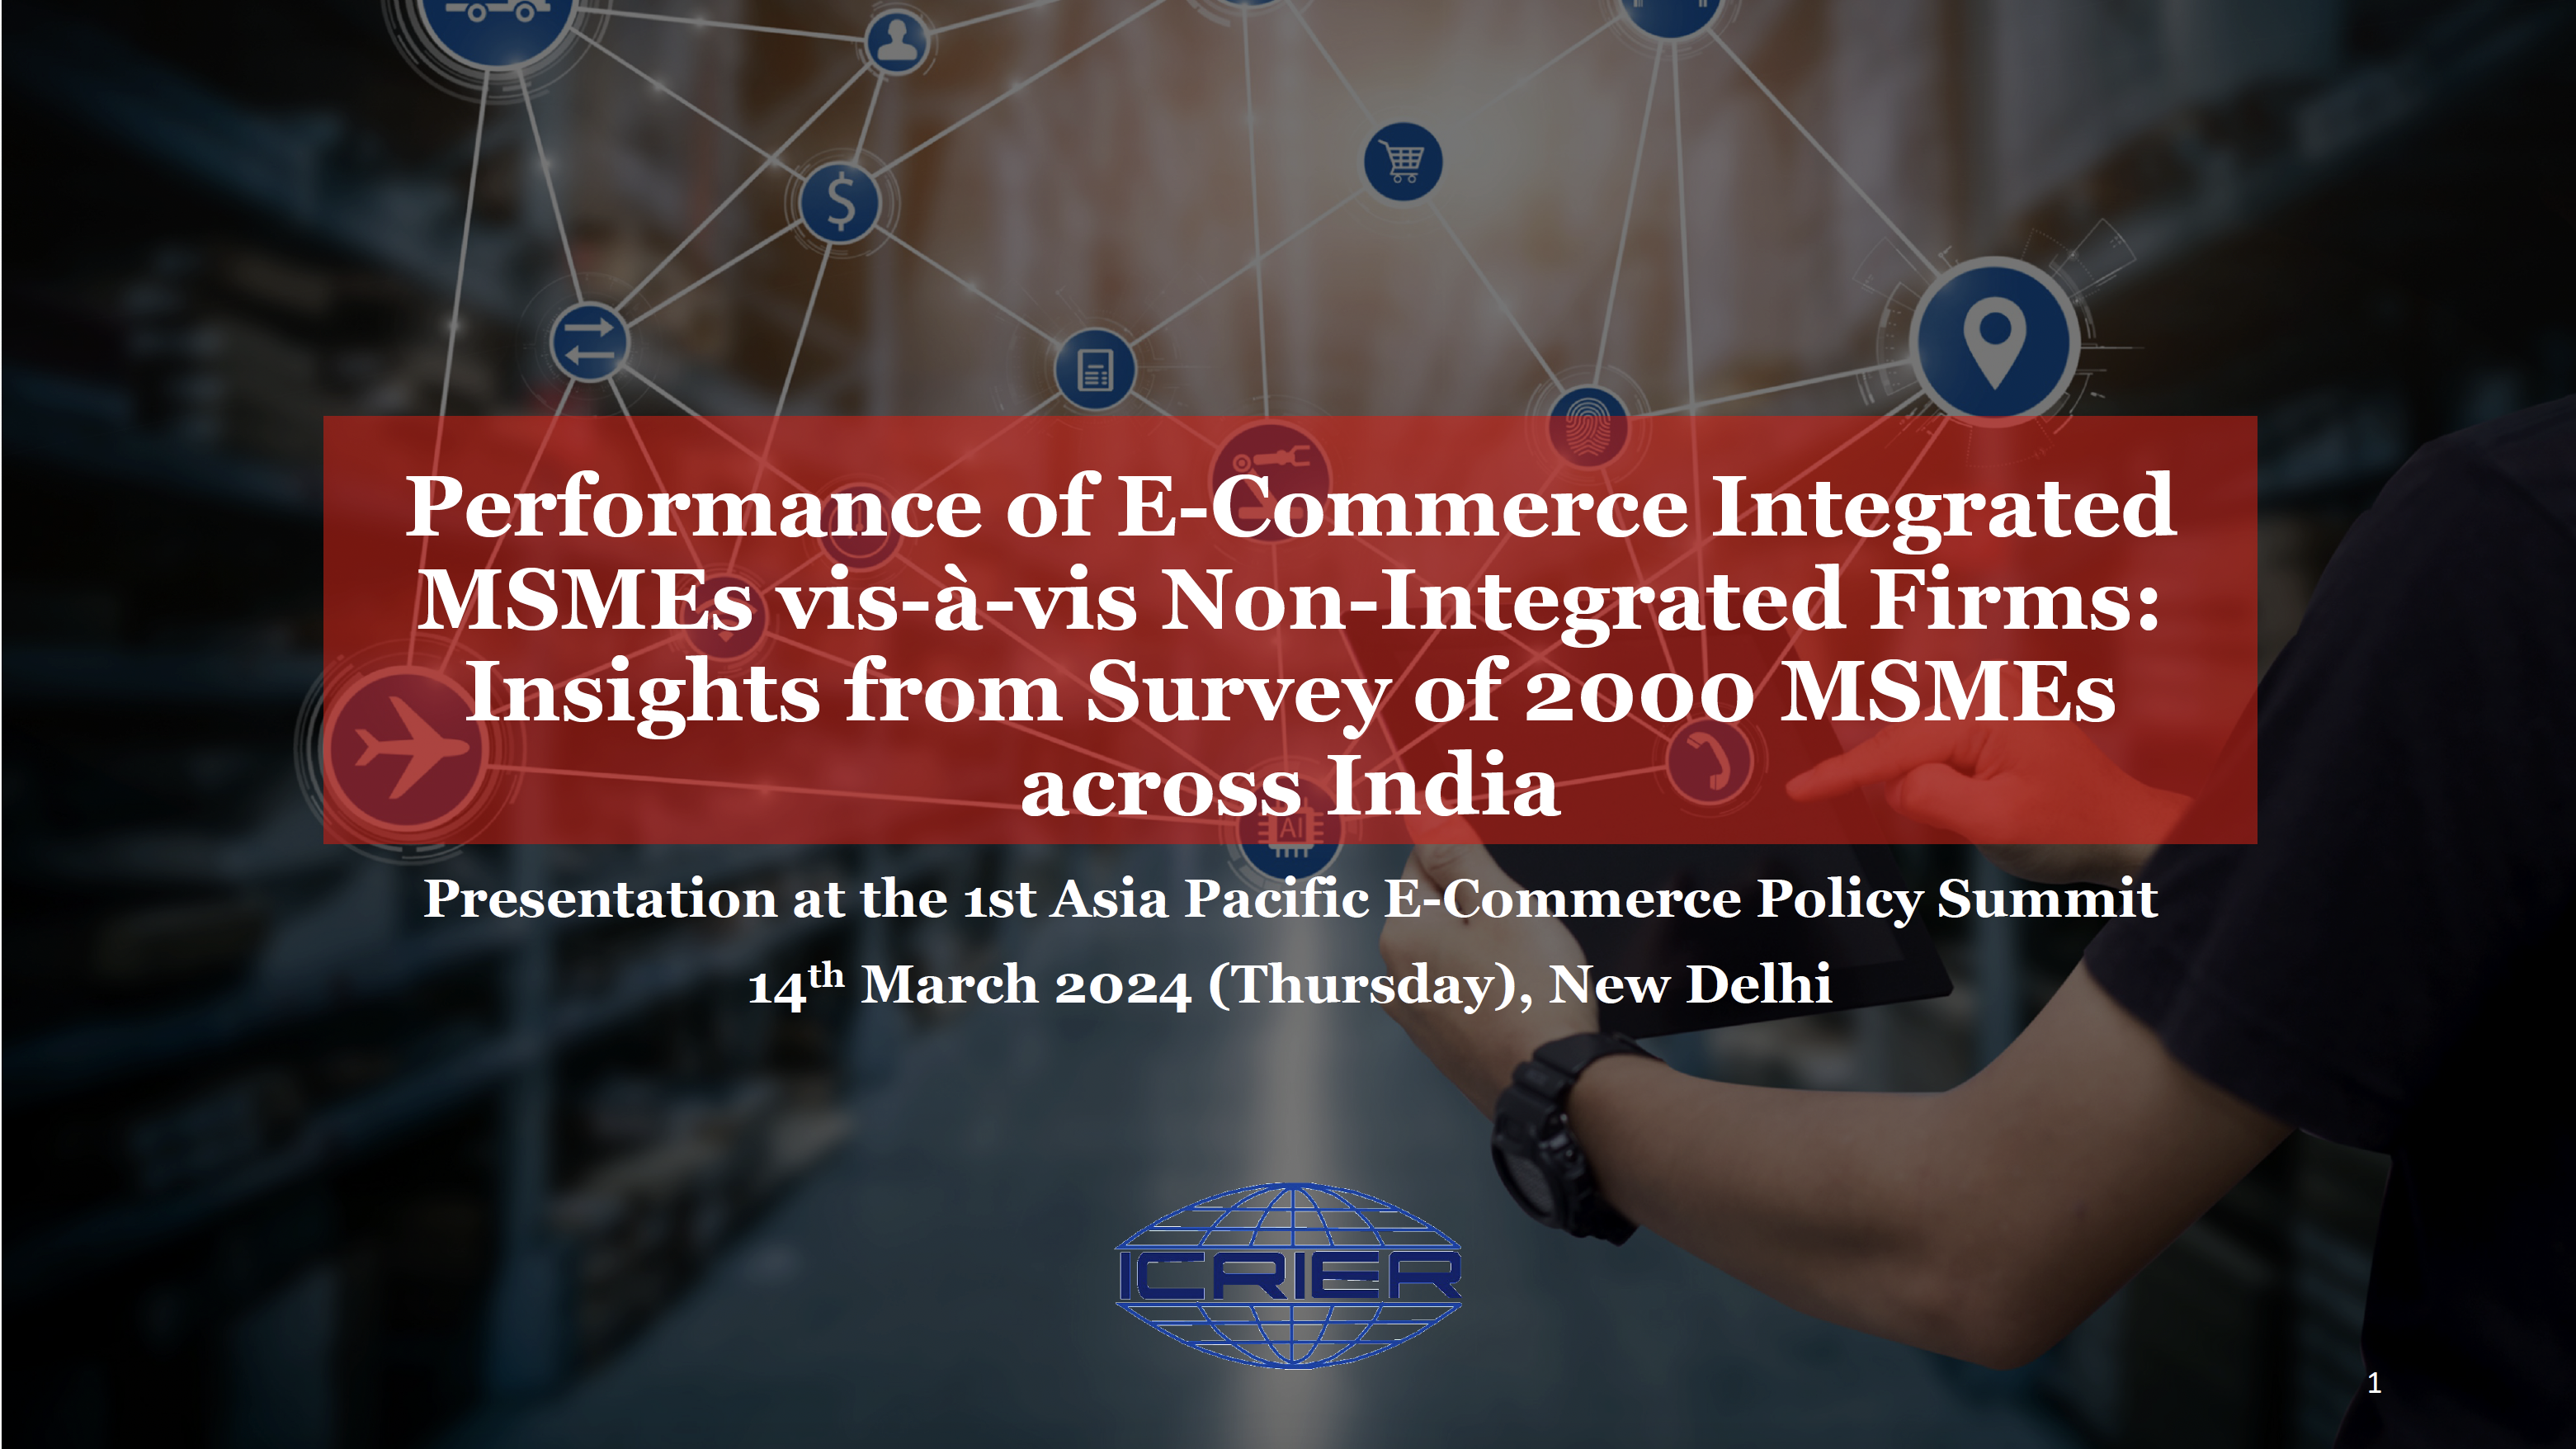 Dr. Tanu M. Goyal, Senior Fellow, Indian Council for Research on International Economic Relations (ICRIER), India, on ‘Performance of ECommerce Integrated MSMEs vis-à-vis Non-Integrated Firms: Insights from survey of 2000 MSMEs across India’